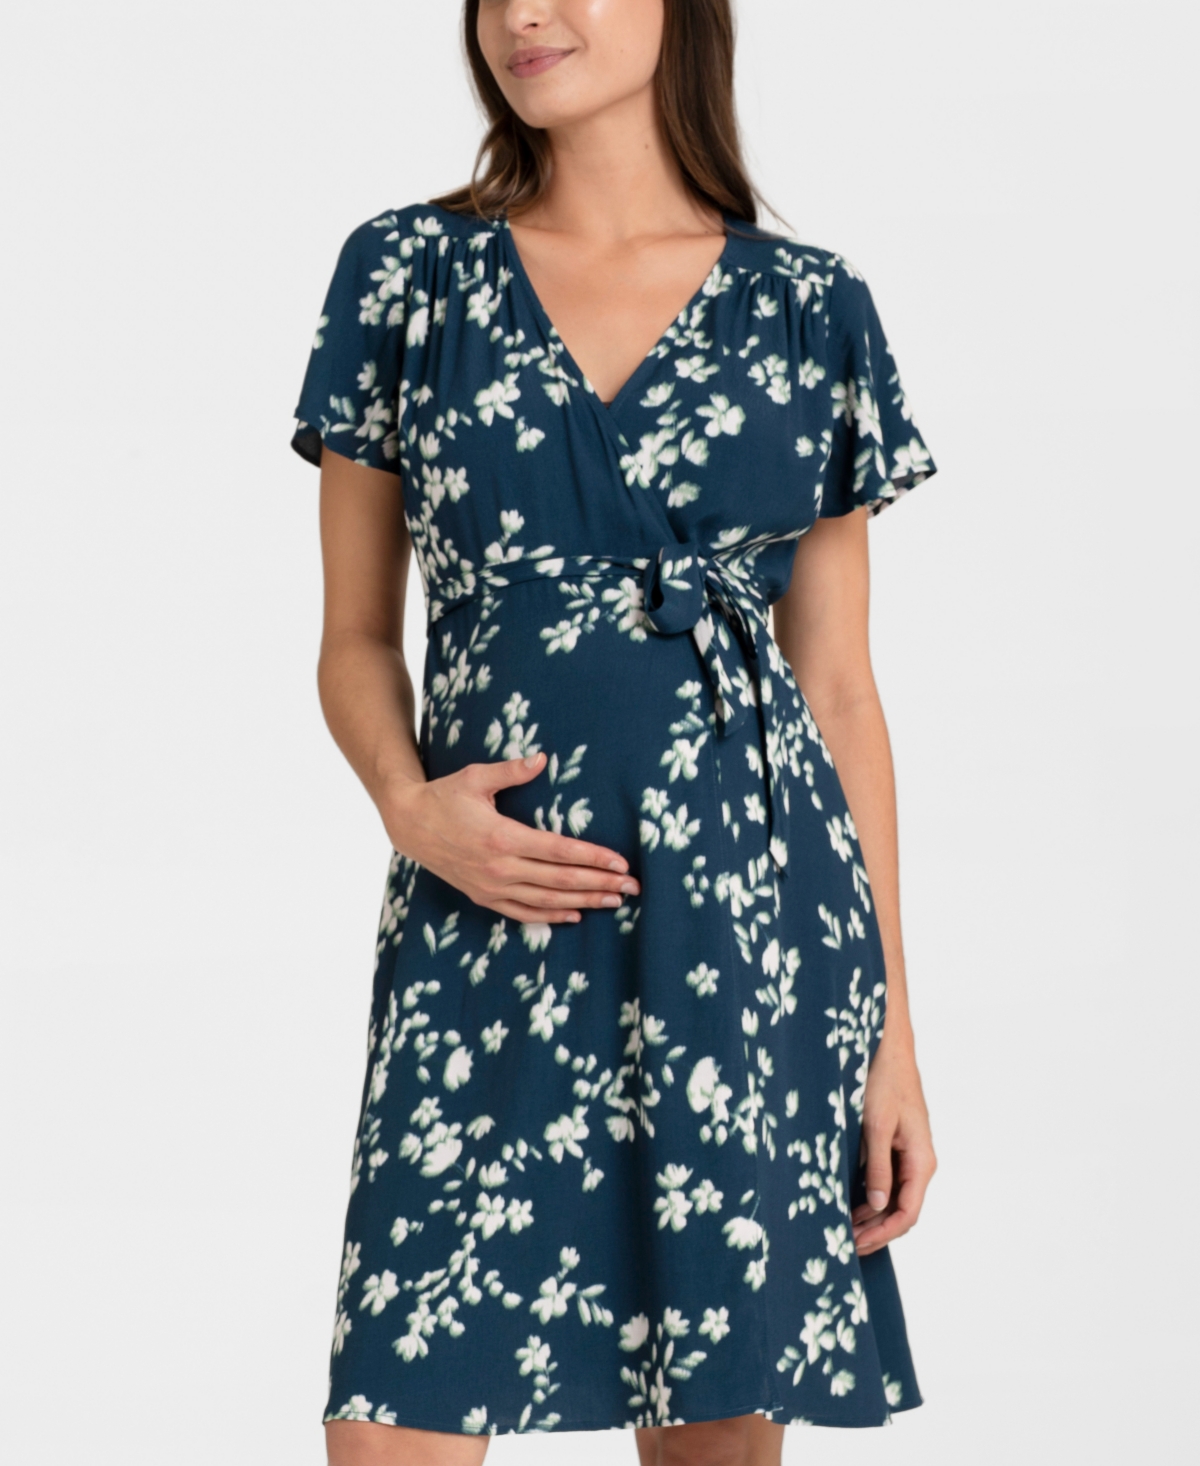 Seraphine Women's Maternity Wrap Summer Dress In Navy And Ecru